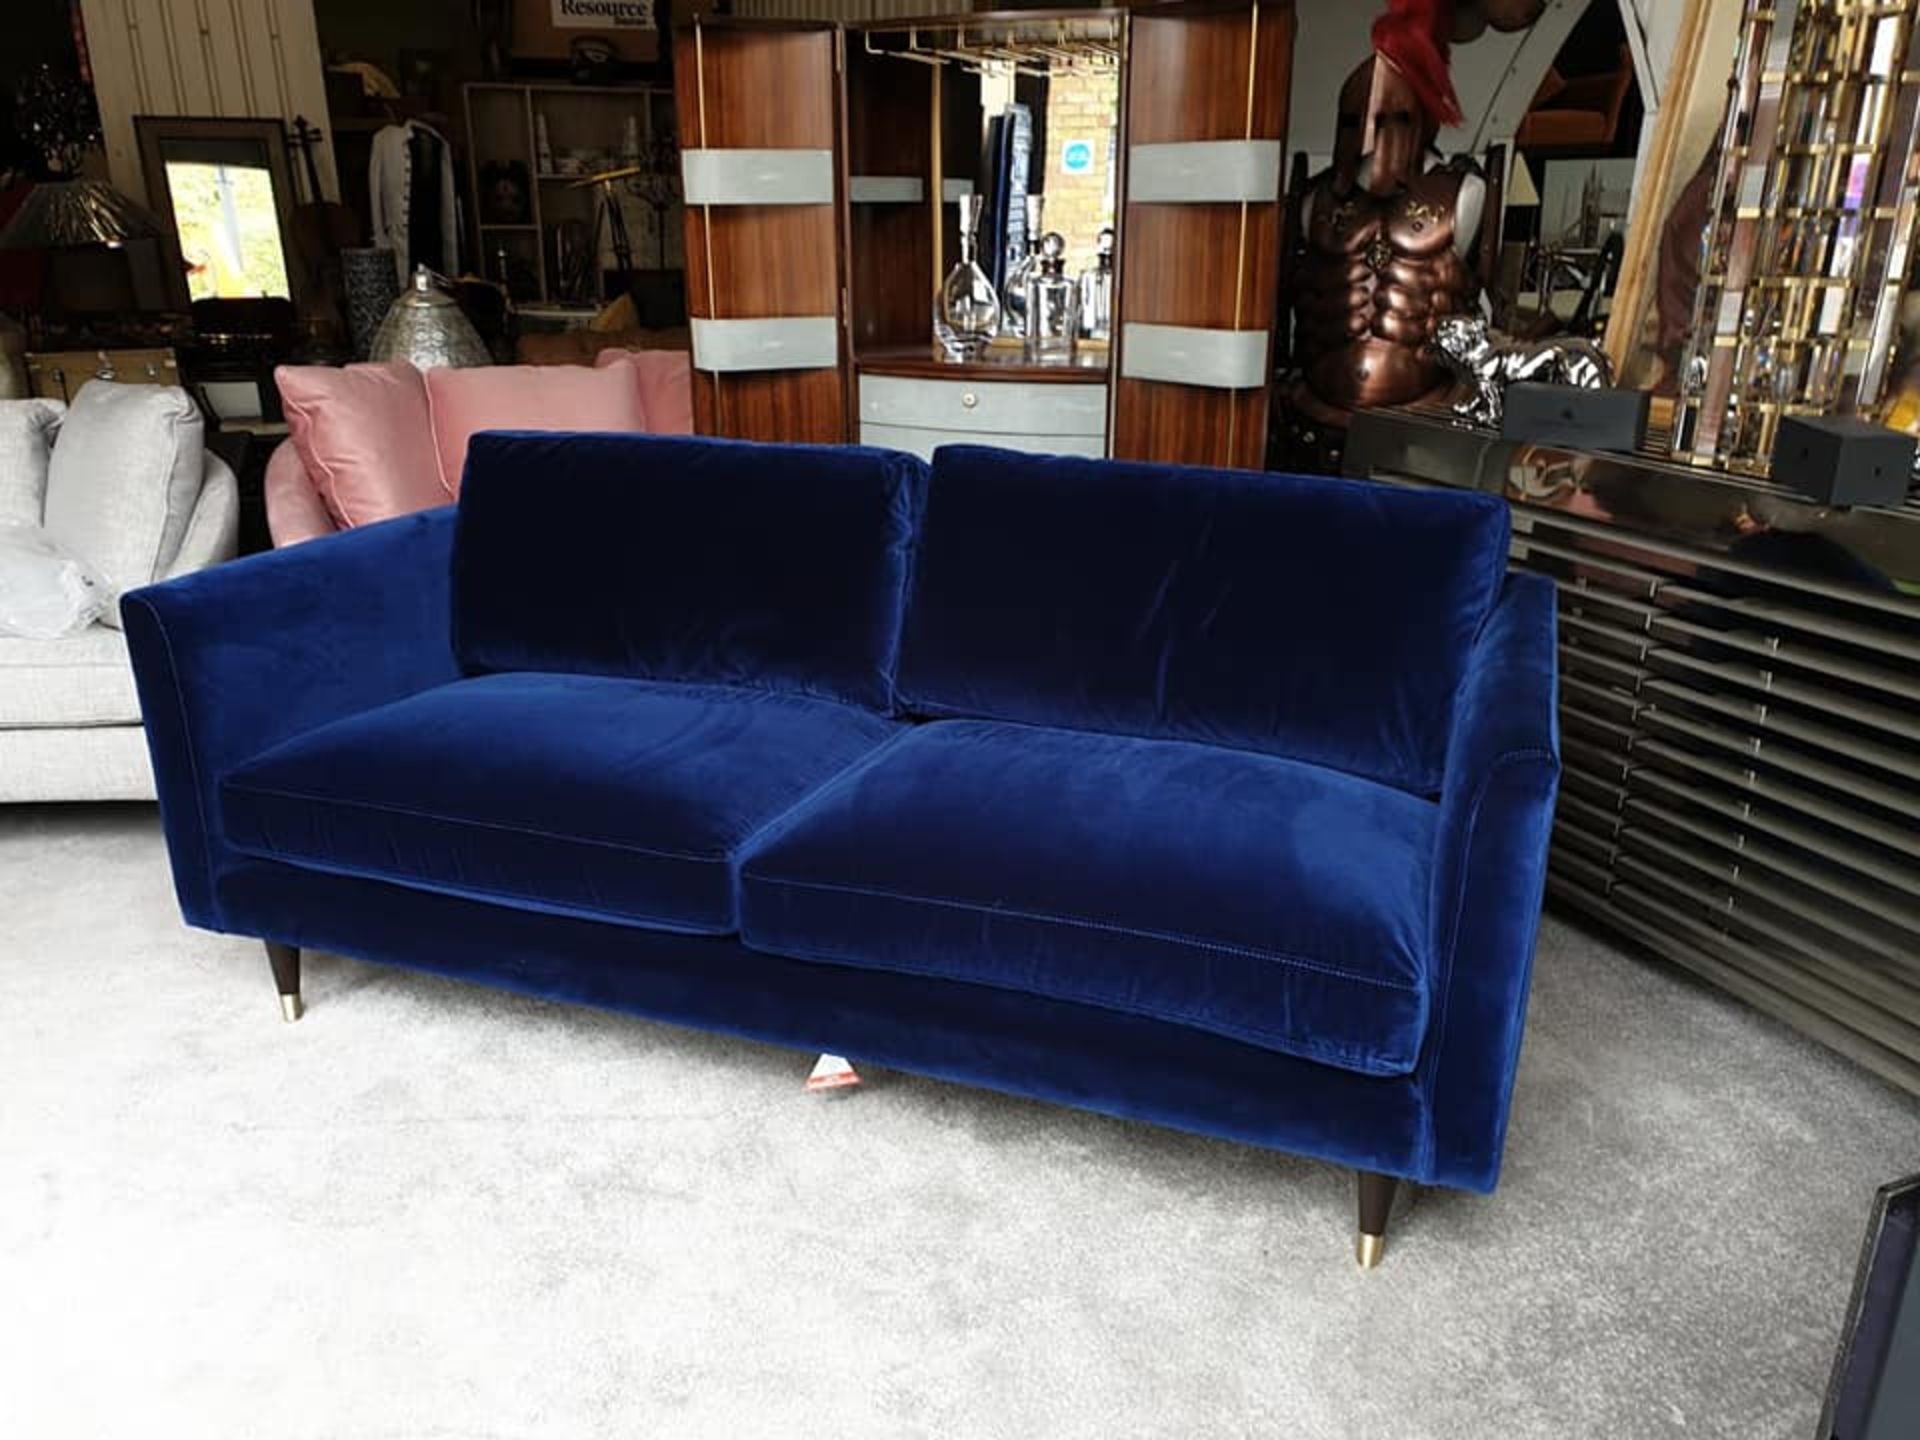 Henry 2 Seater Velvet Sofa - Navy Blue Henry By Christiane Lemieux Is A Contemporary Sofa With